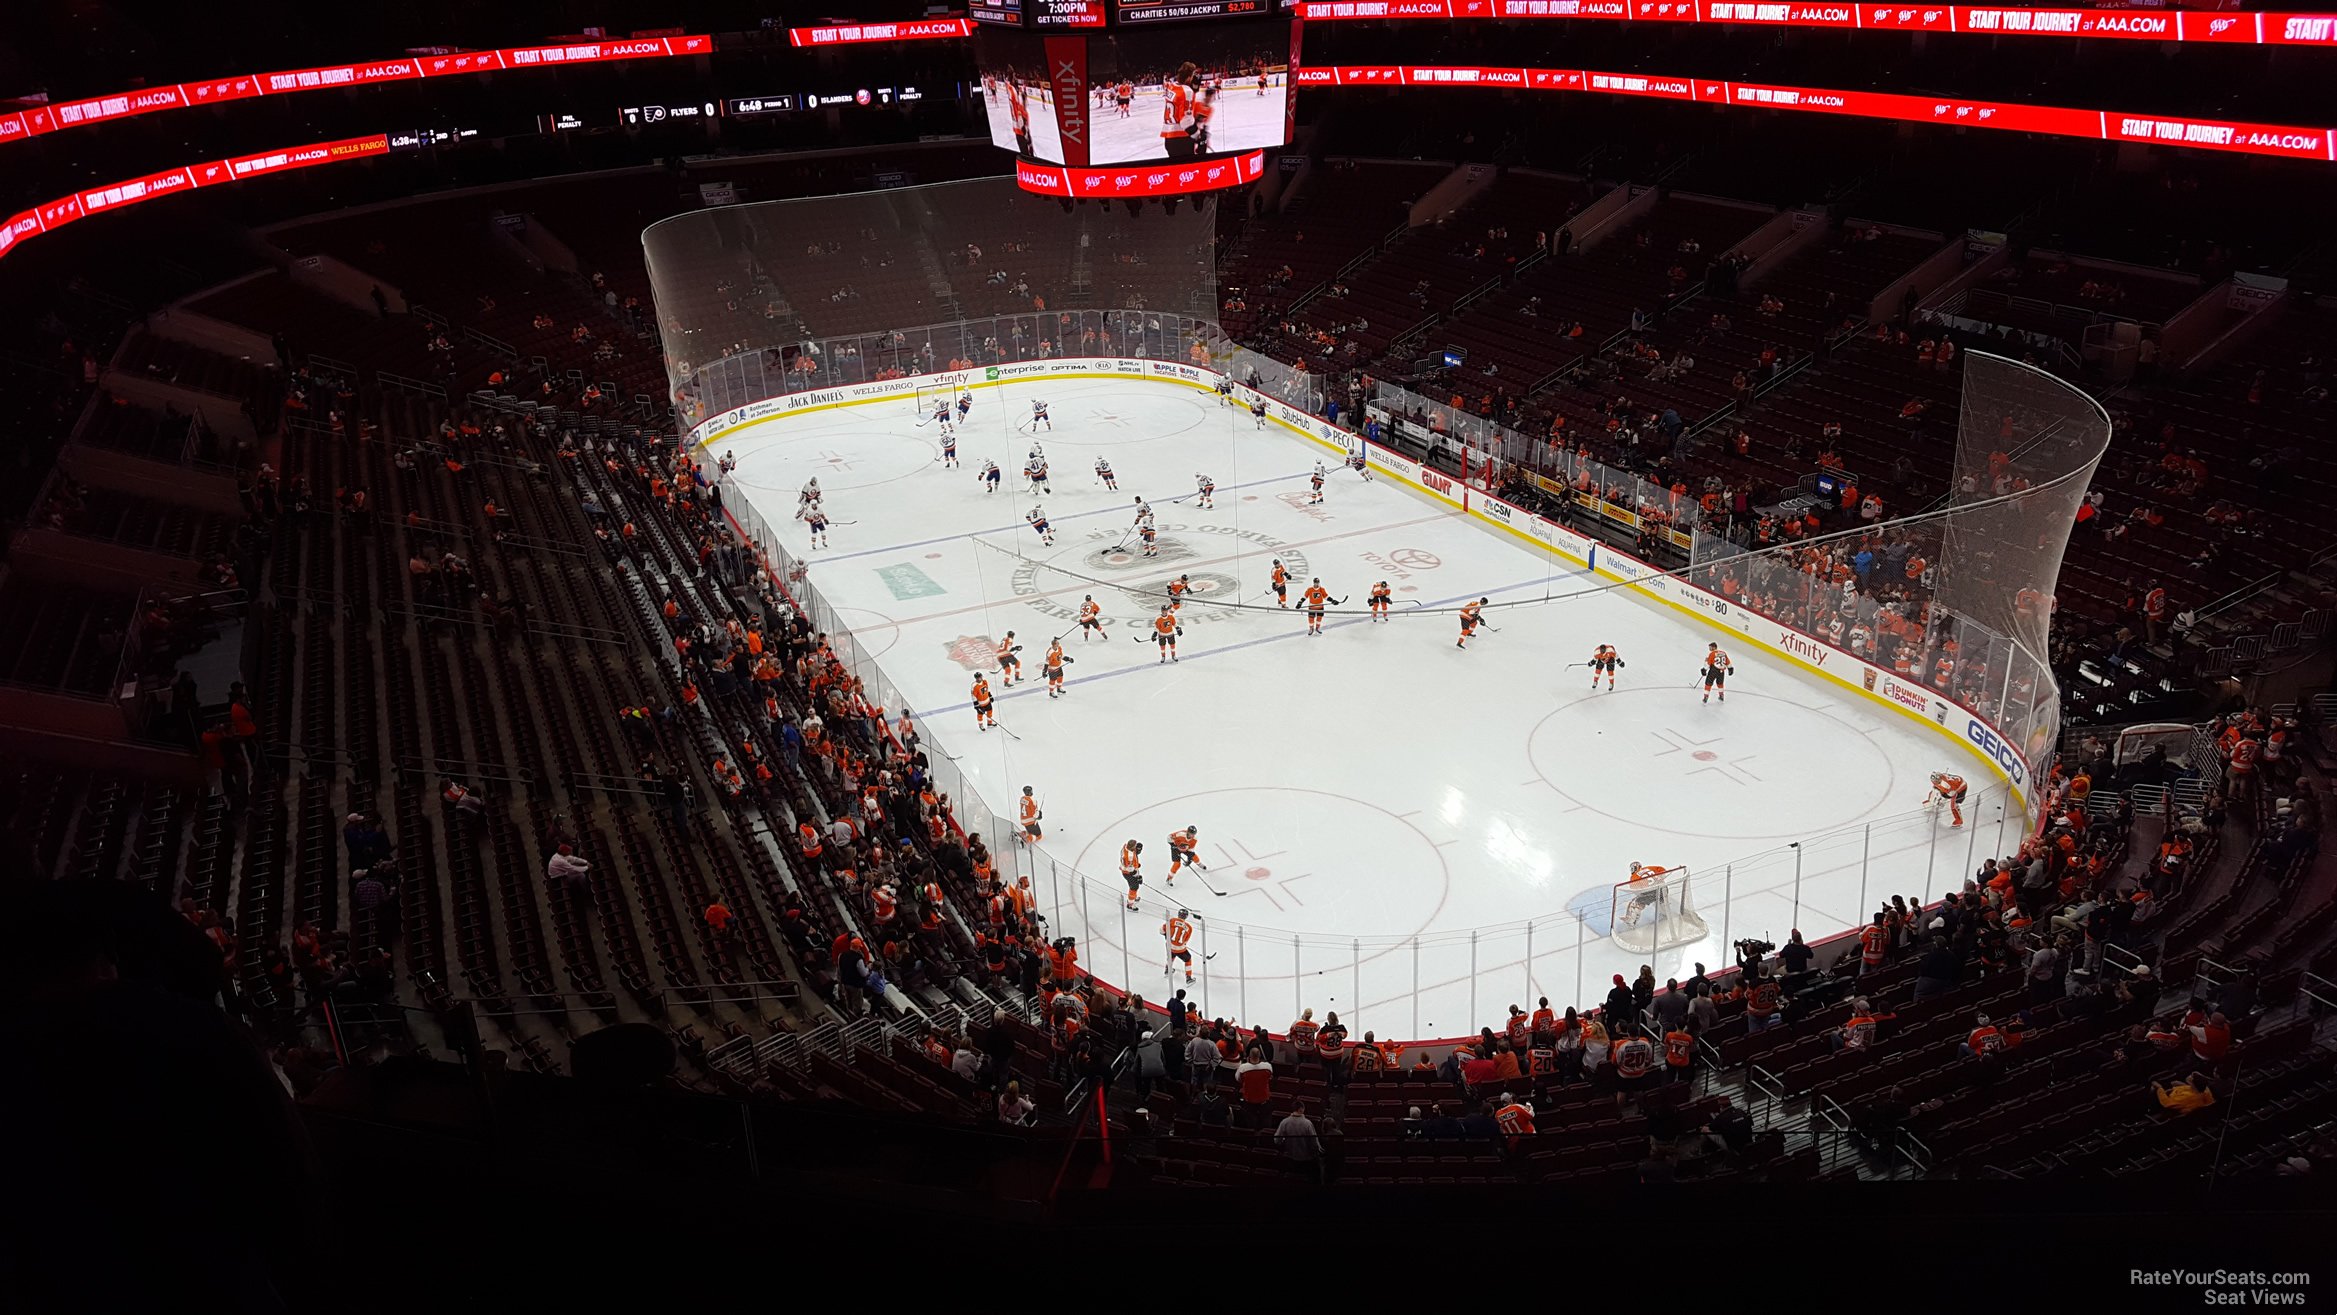 section 217, row 8 seat view  for hockey - wells fargo center